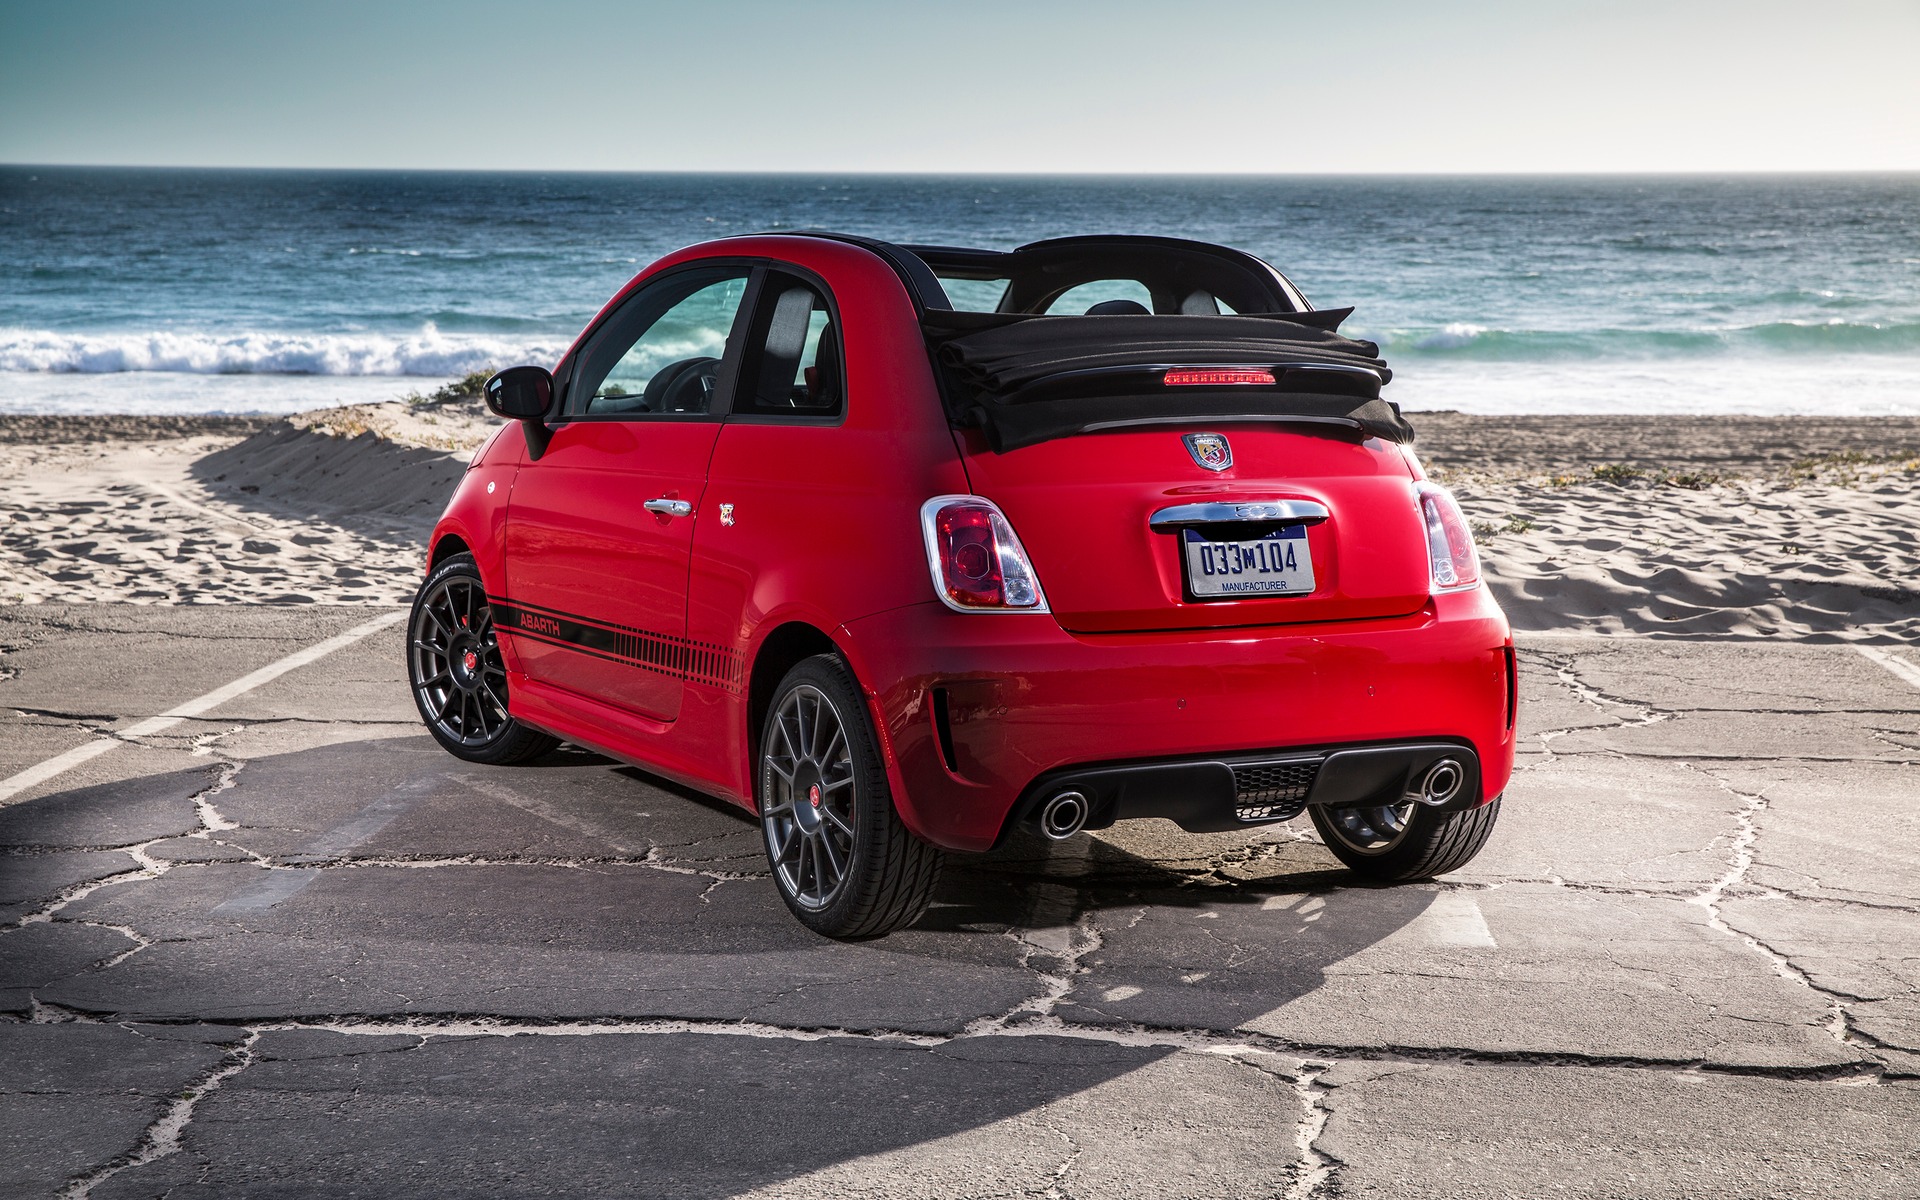 17 Fiat 500 News Reviews Picture Galleries And Videos The Car Guide